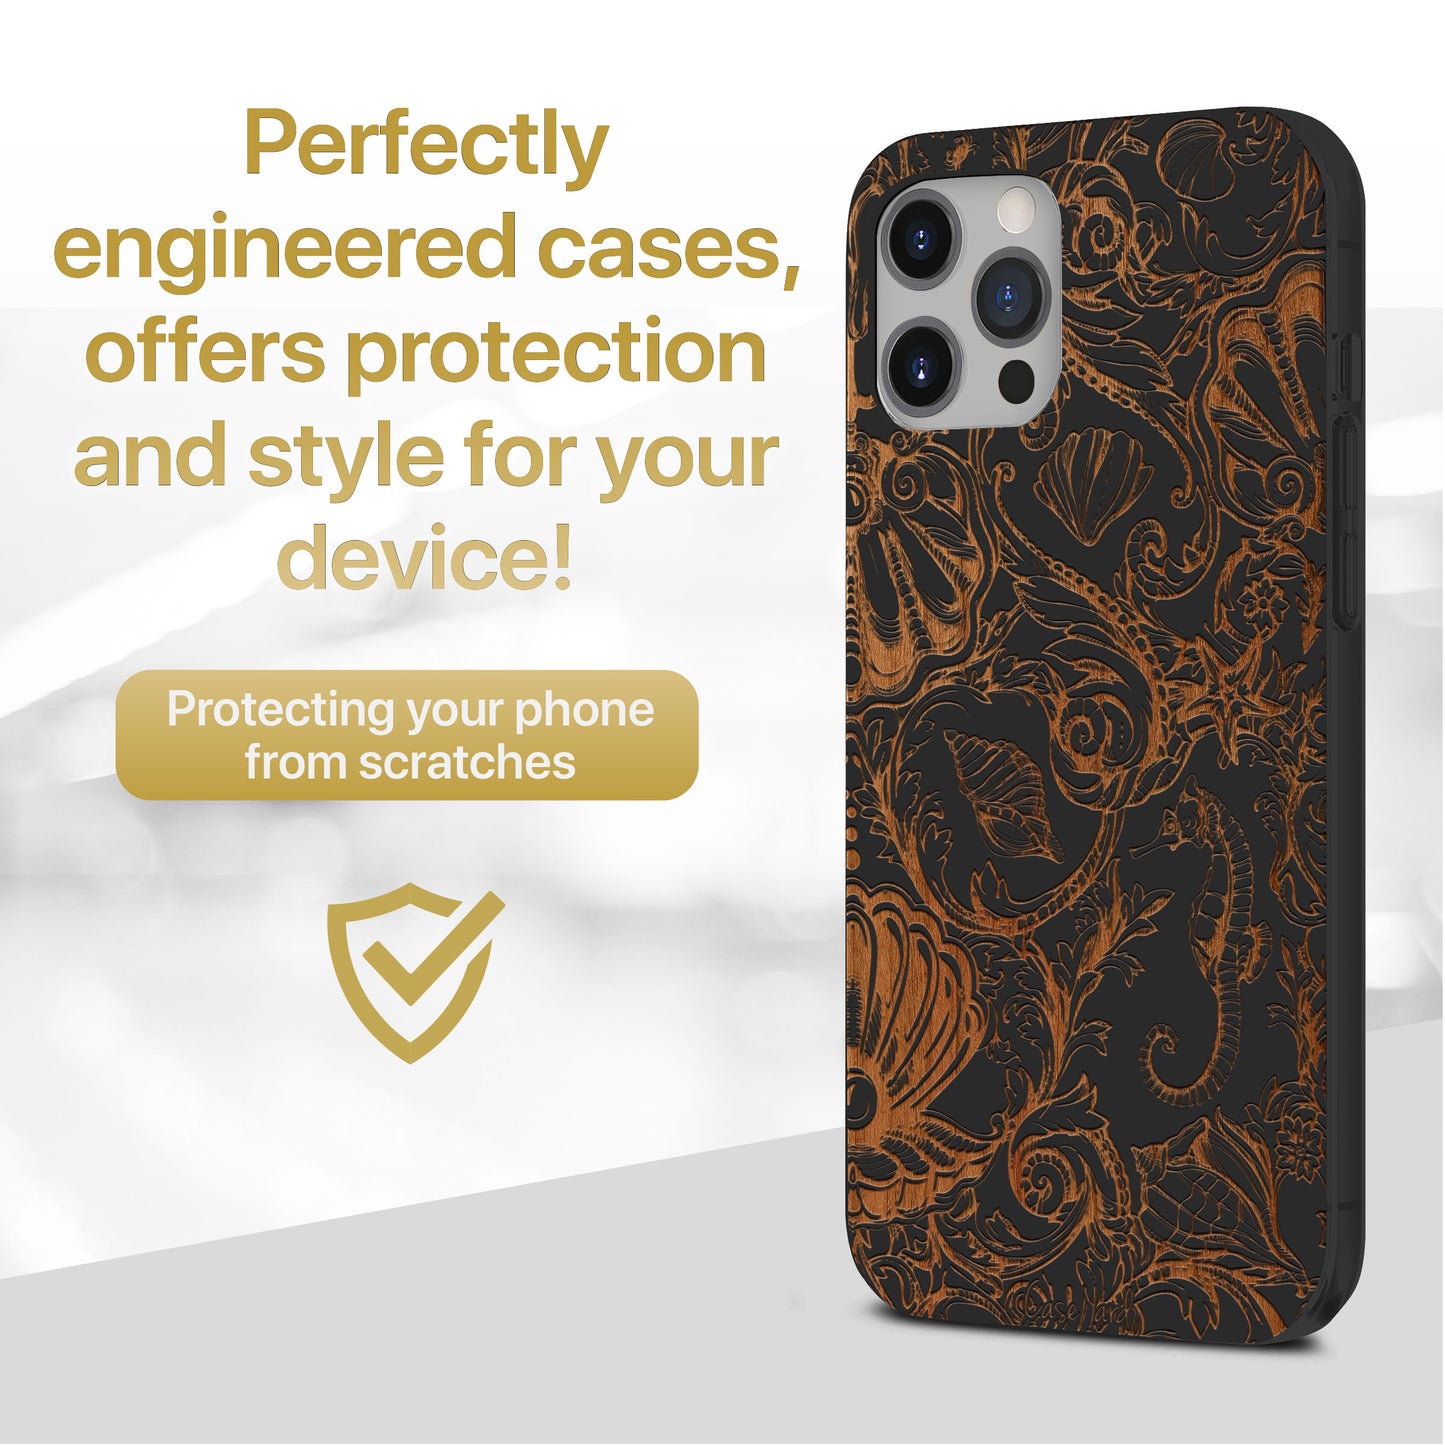 Wooden Cell Phone Case Cover, Laser Engraved case for iPhone & Samsung phone Vintage Sea Design